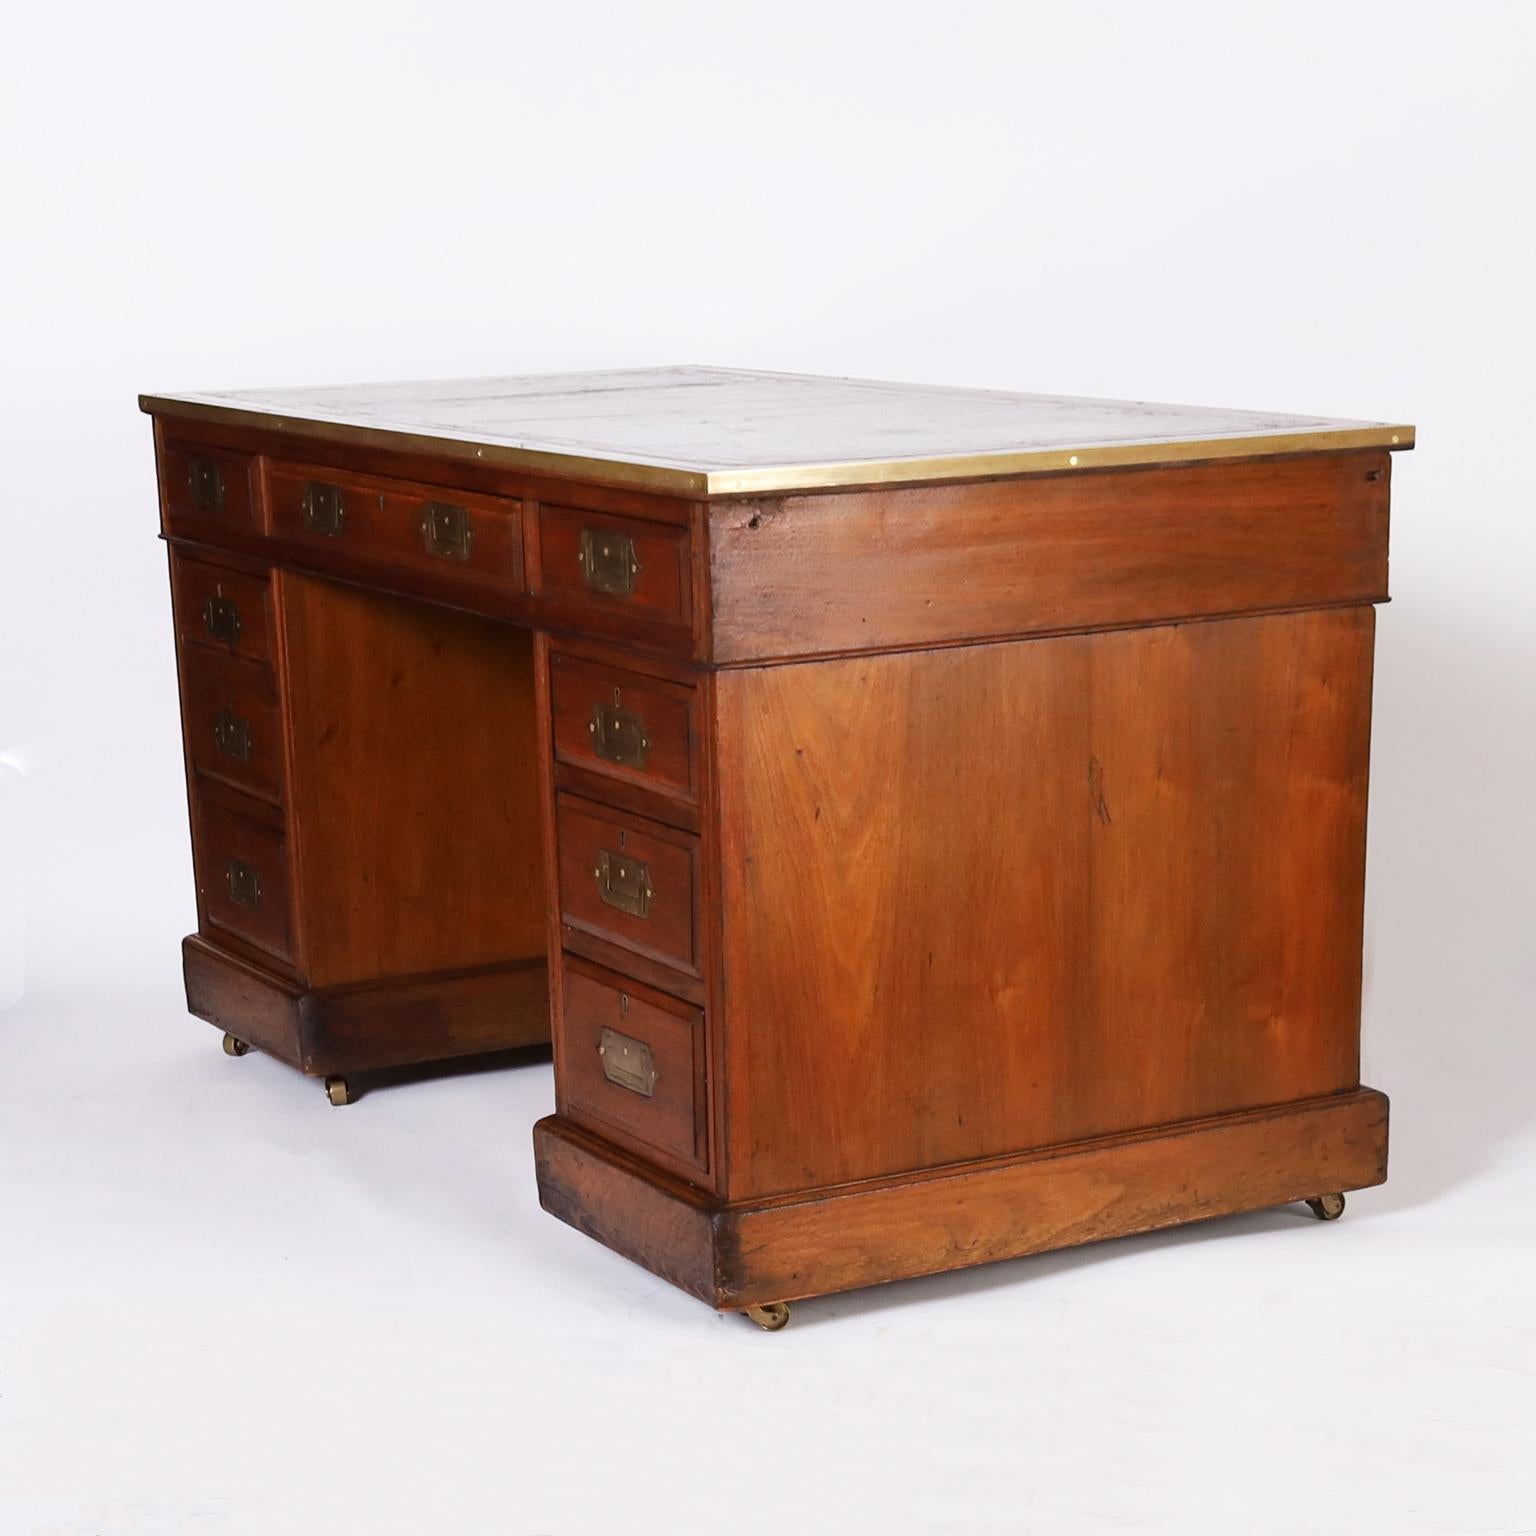 Hand-Crafted English Leather Top Campaign Desk For Sale